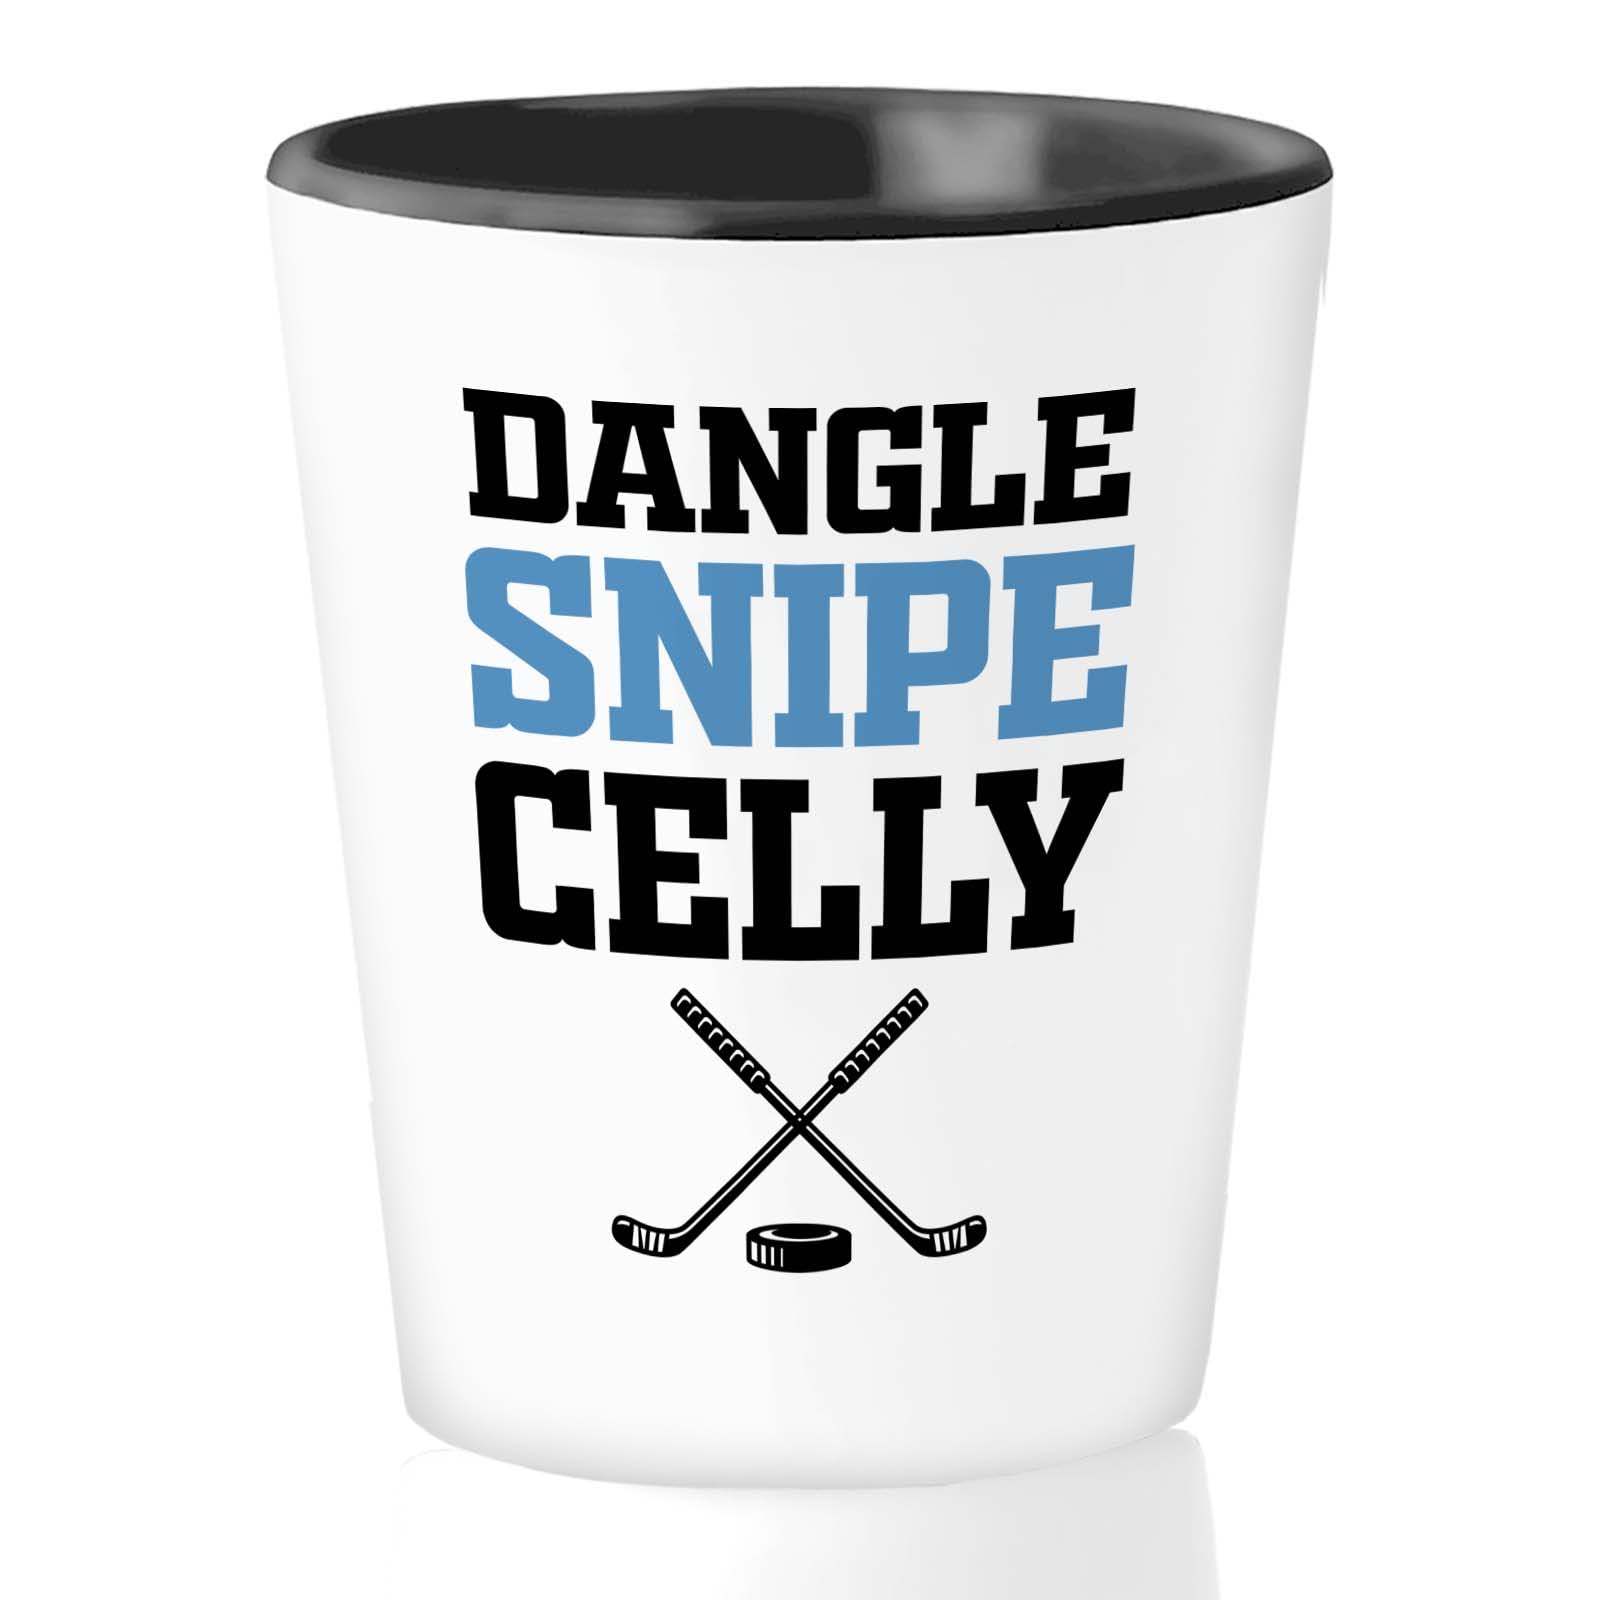 Bubble Hugs Hockey Shot Glass 1.5oz - Dangle Snipe Celly - Funny Hilarious Quote for Ice Hockey Player Coach Fan Hockey Puck Sports Lover